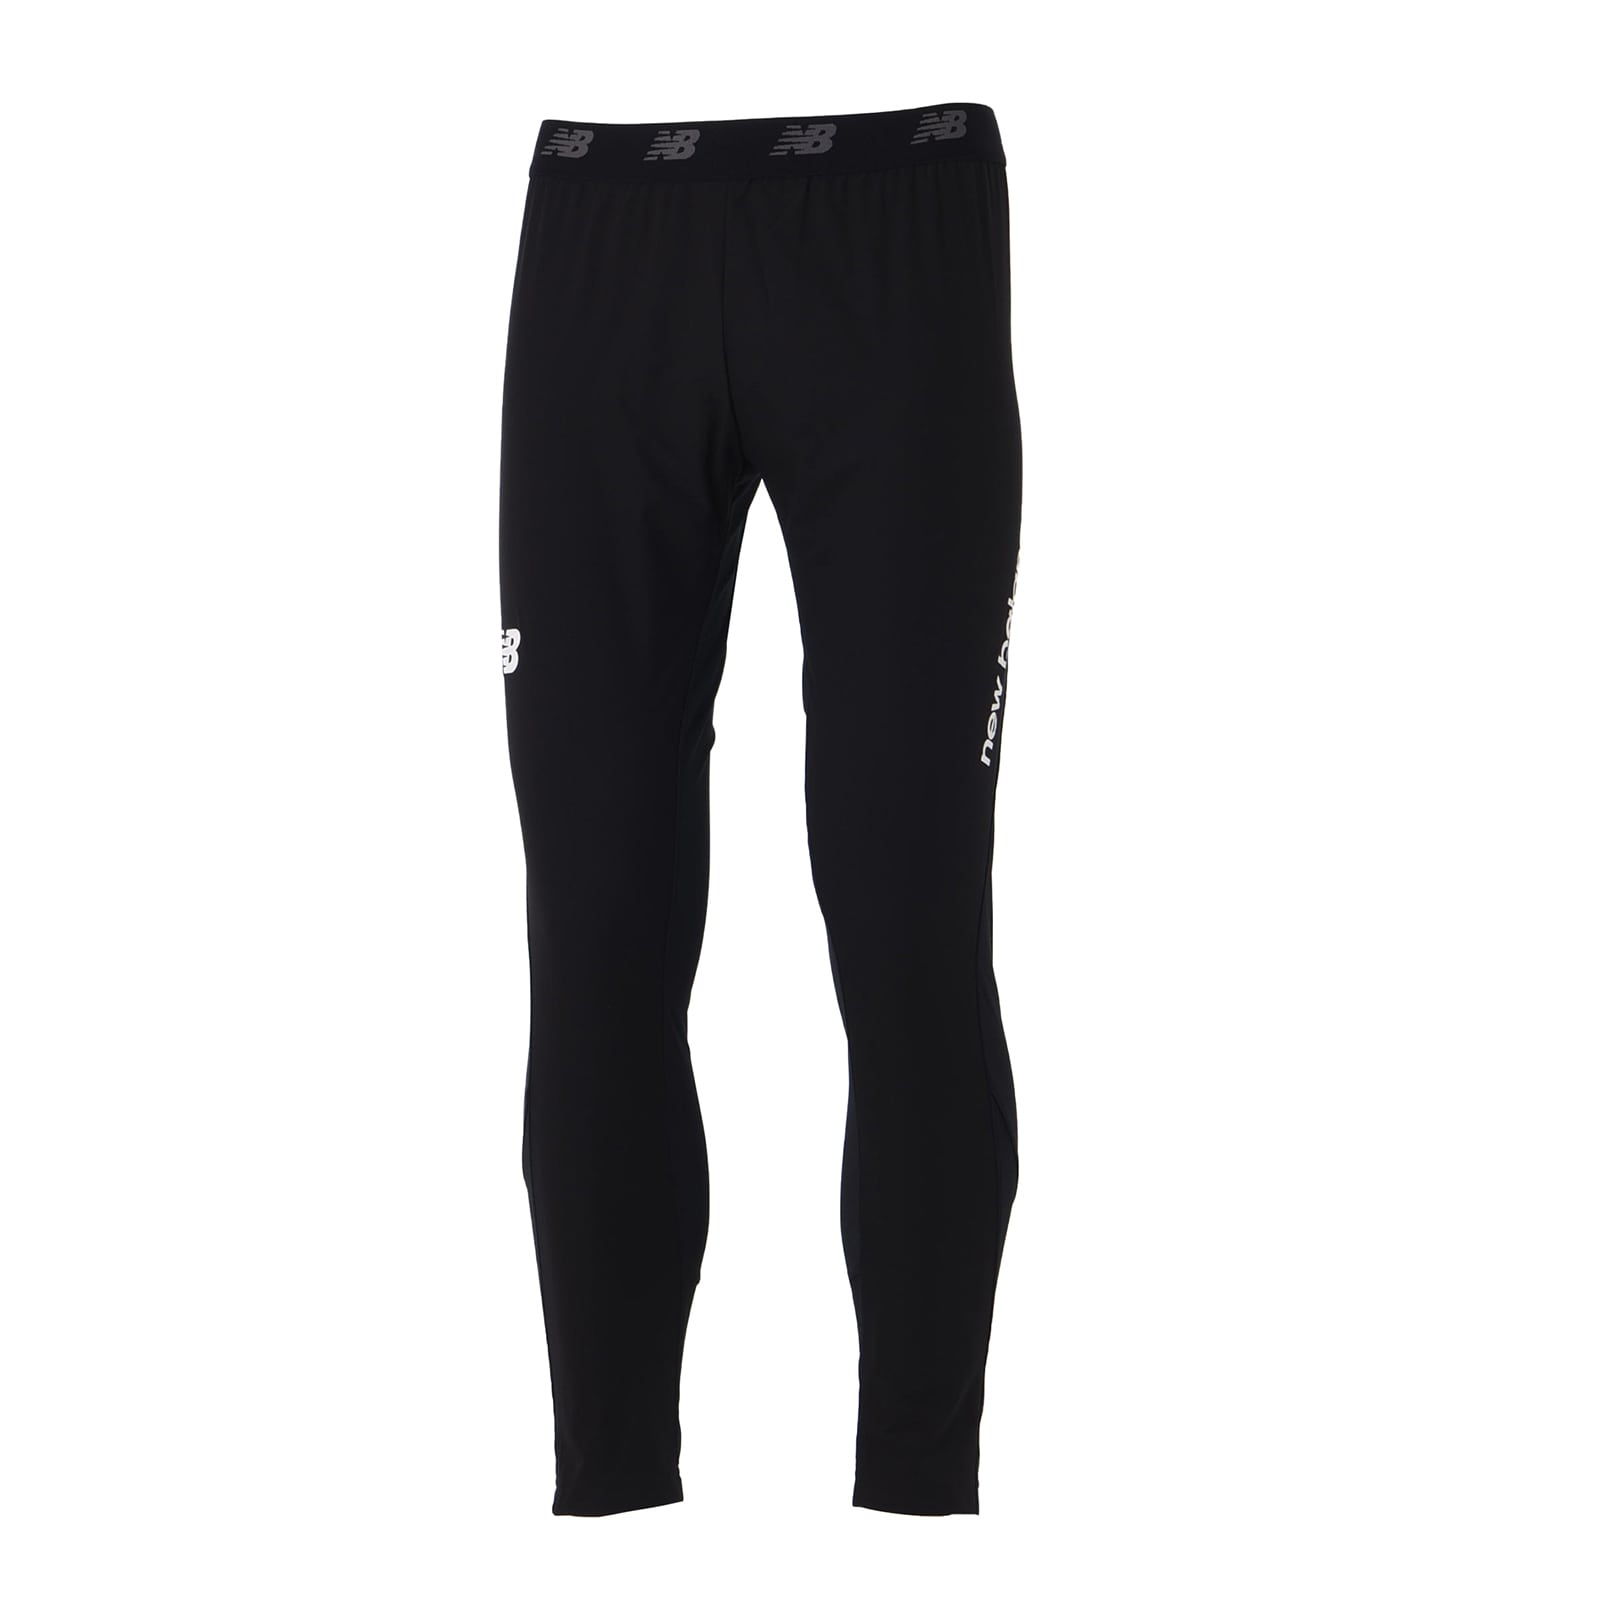 Black Out Collection Hybrid Training Pants Pro